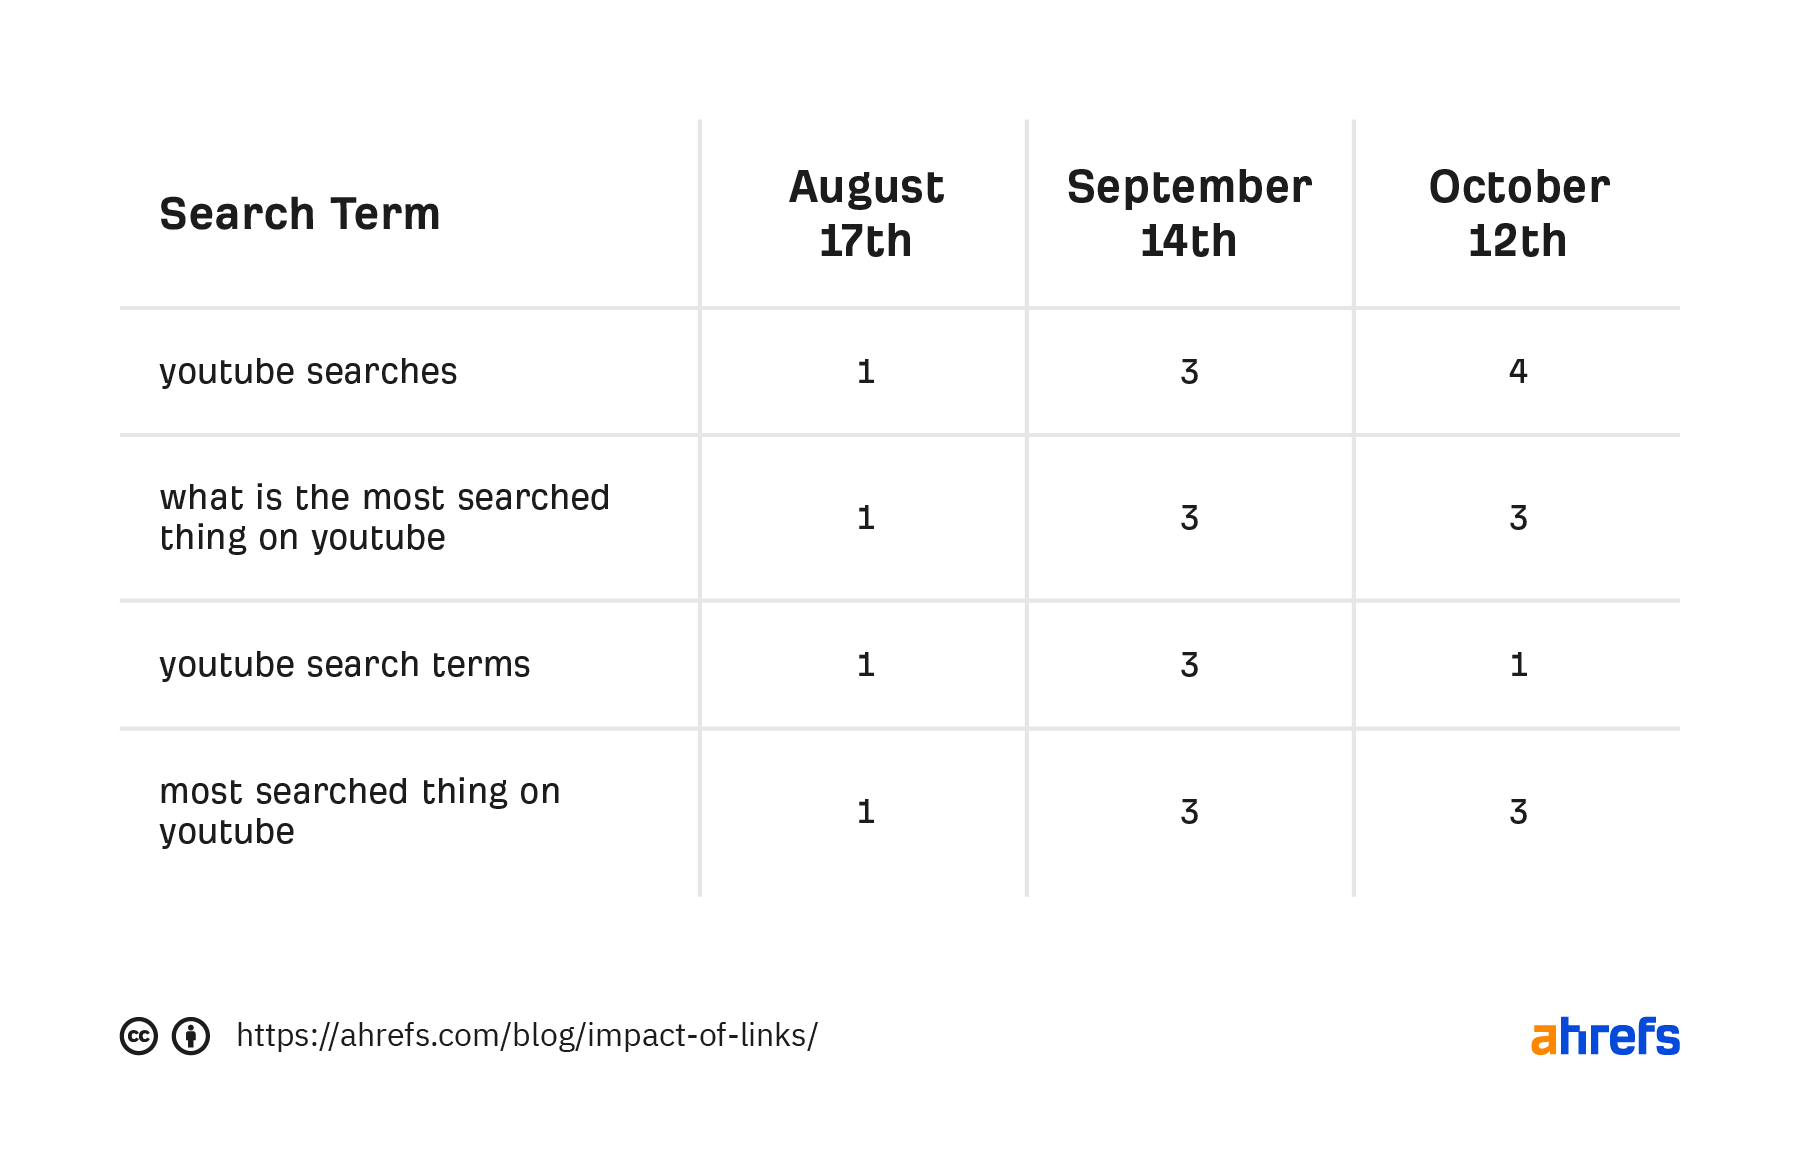 List of terms and corresponding ranking changes on Aug 17, Sept 14, and Oct 12